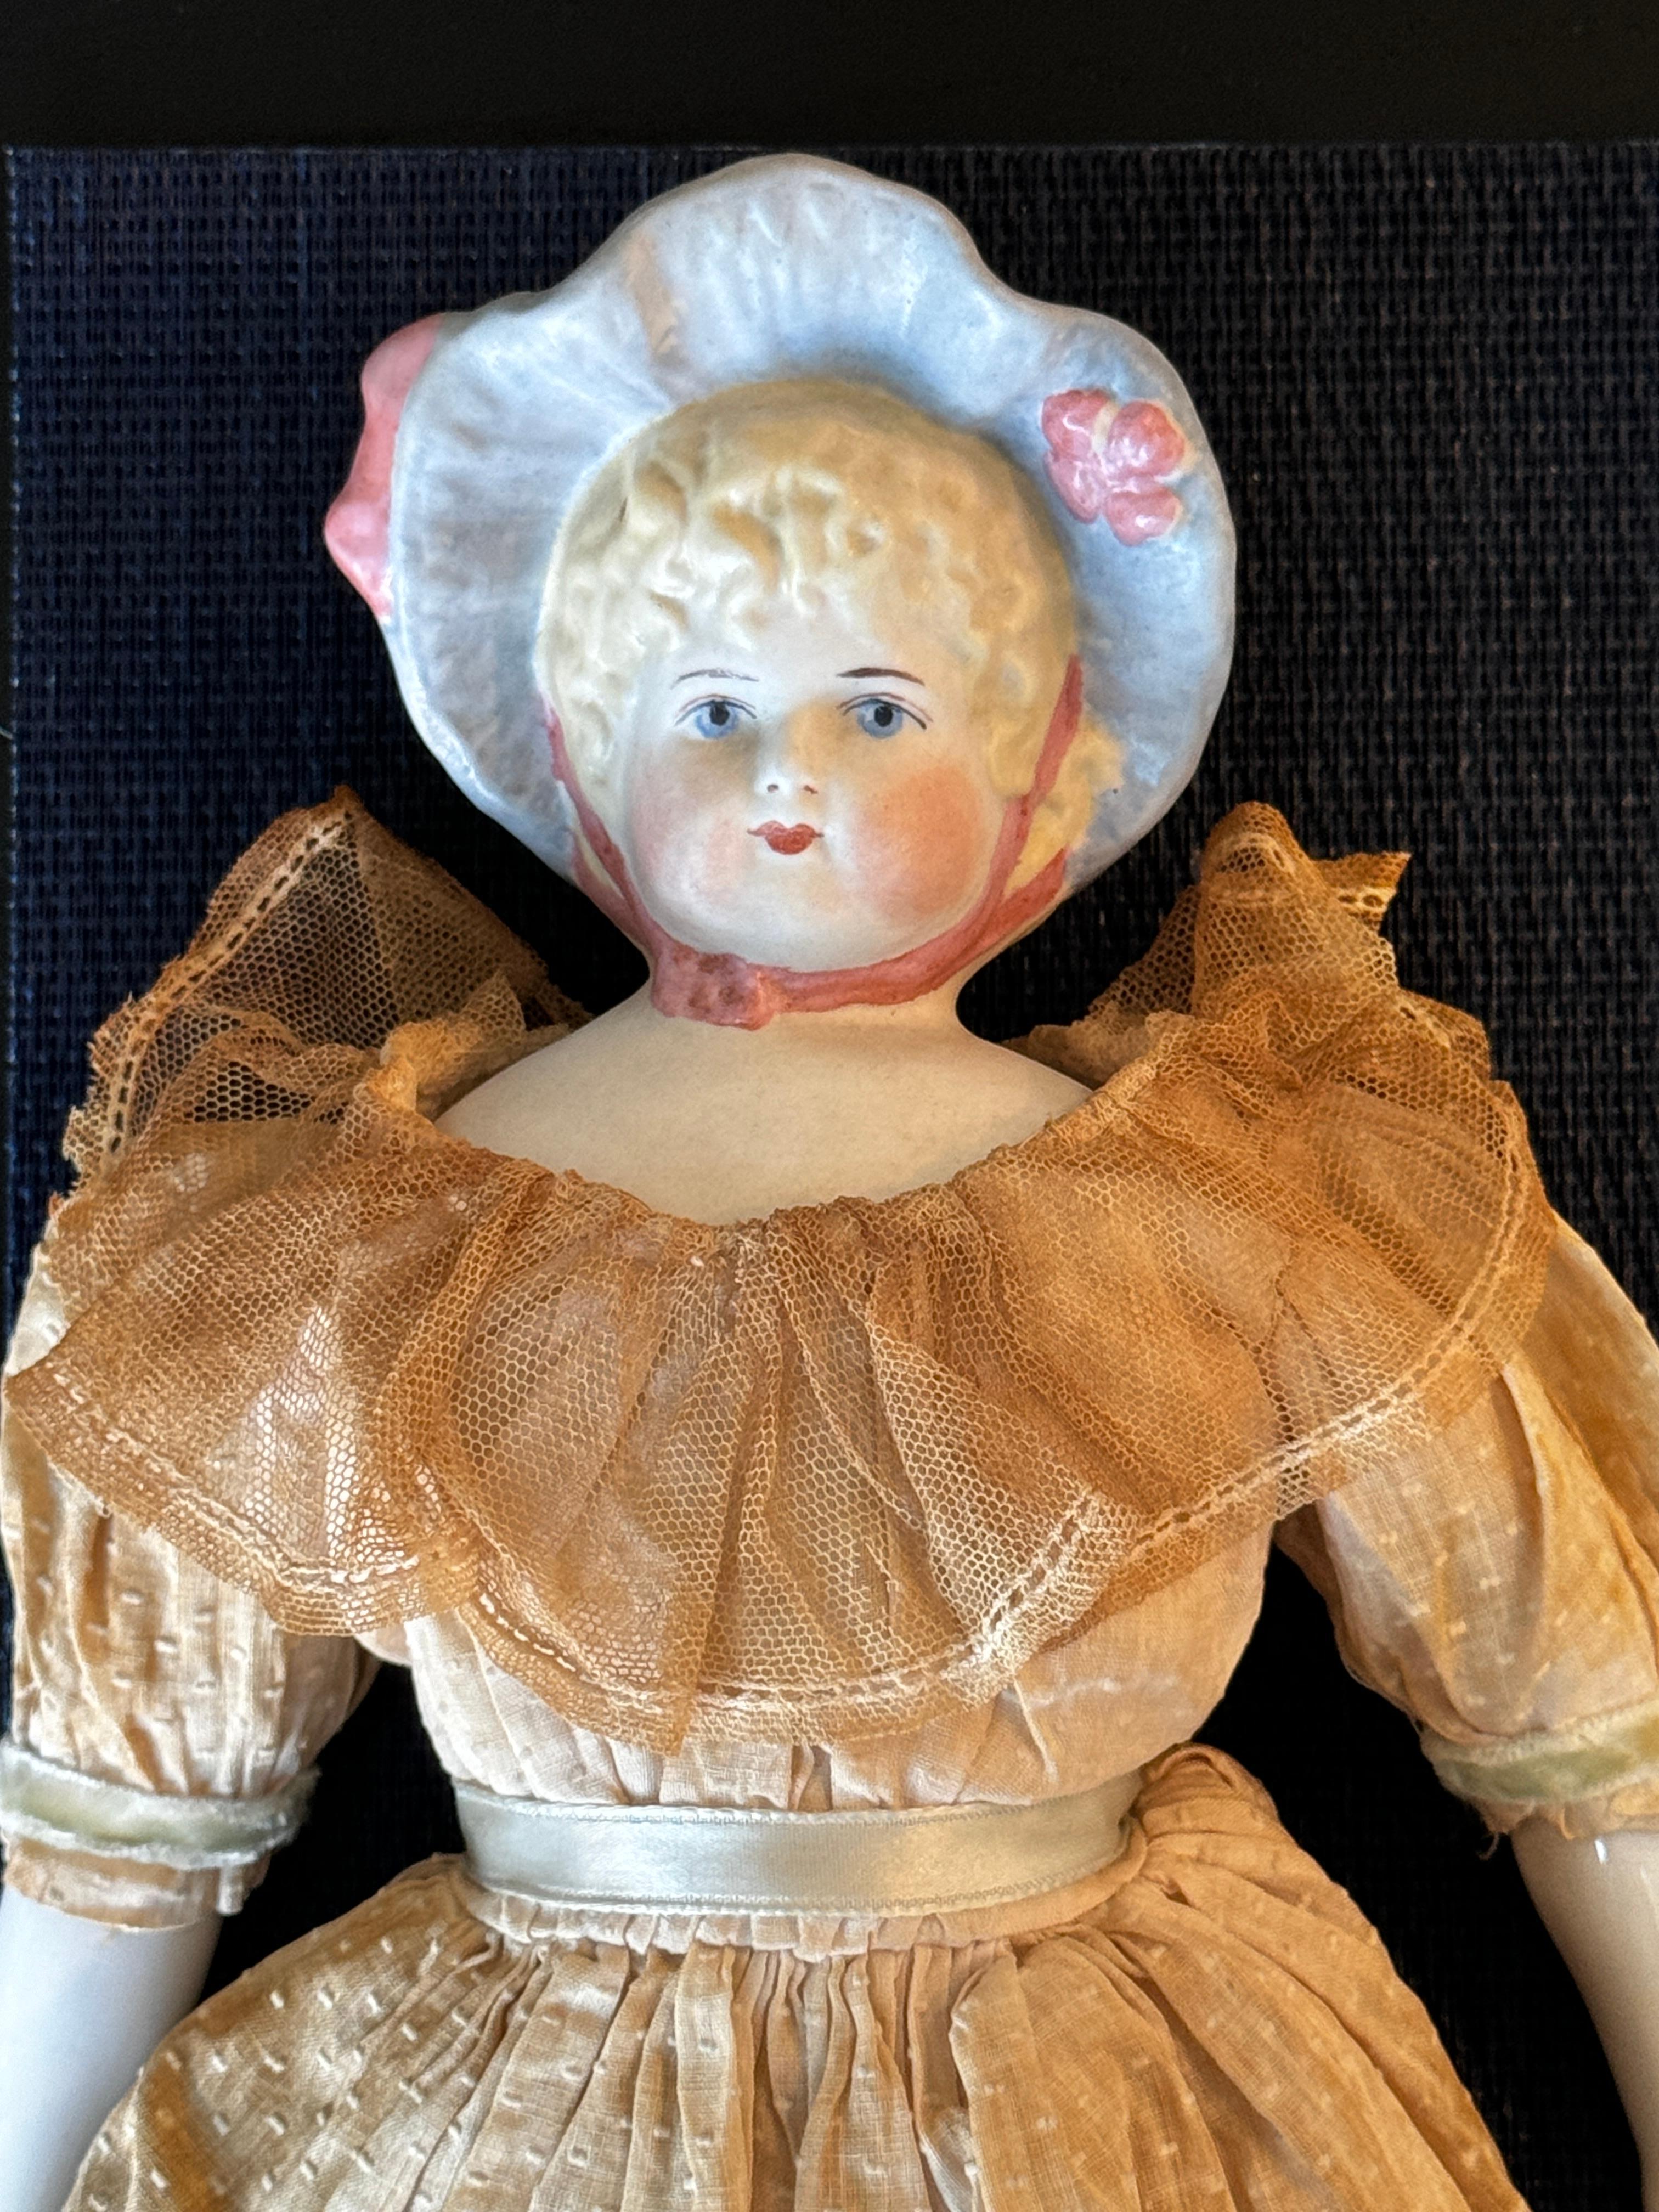 Two 19th Century Bisque + Porcelain Dolls

One signed Lathrop on back of shoulders

5.5